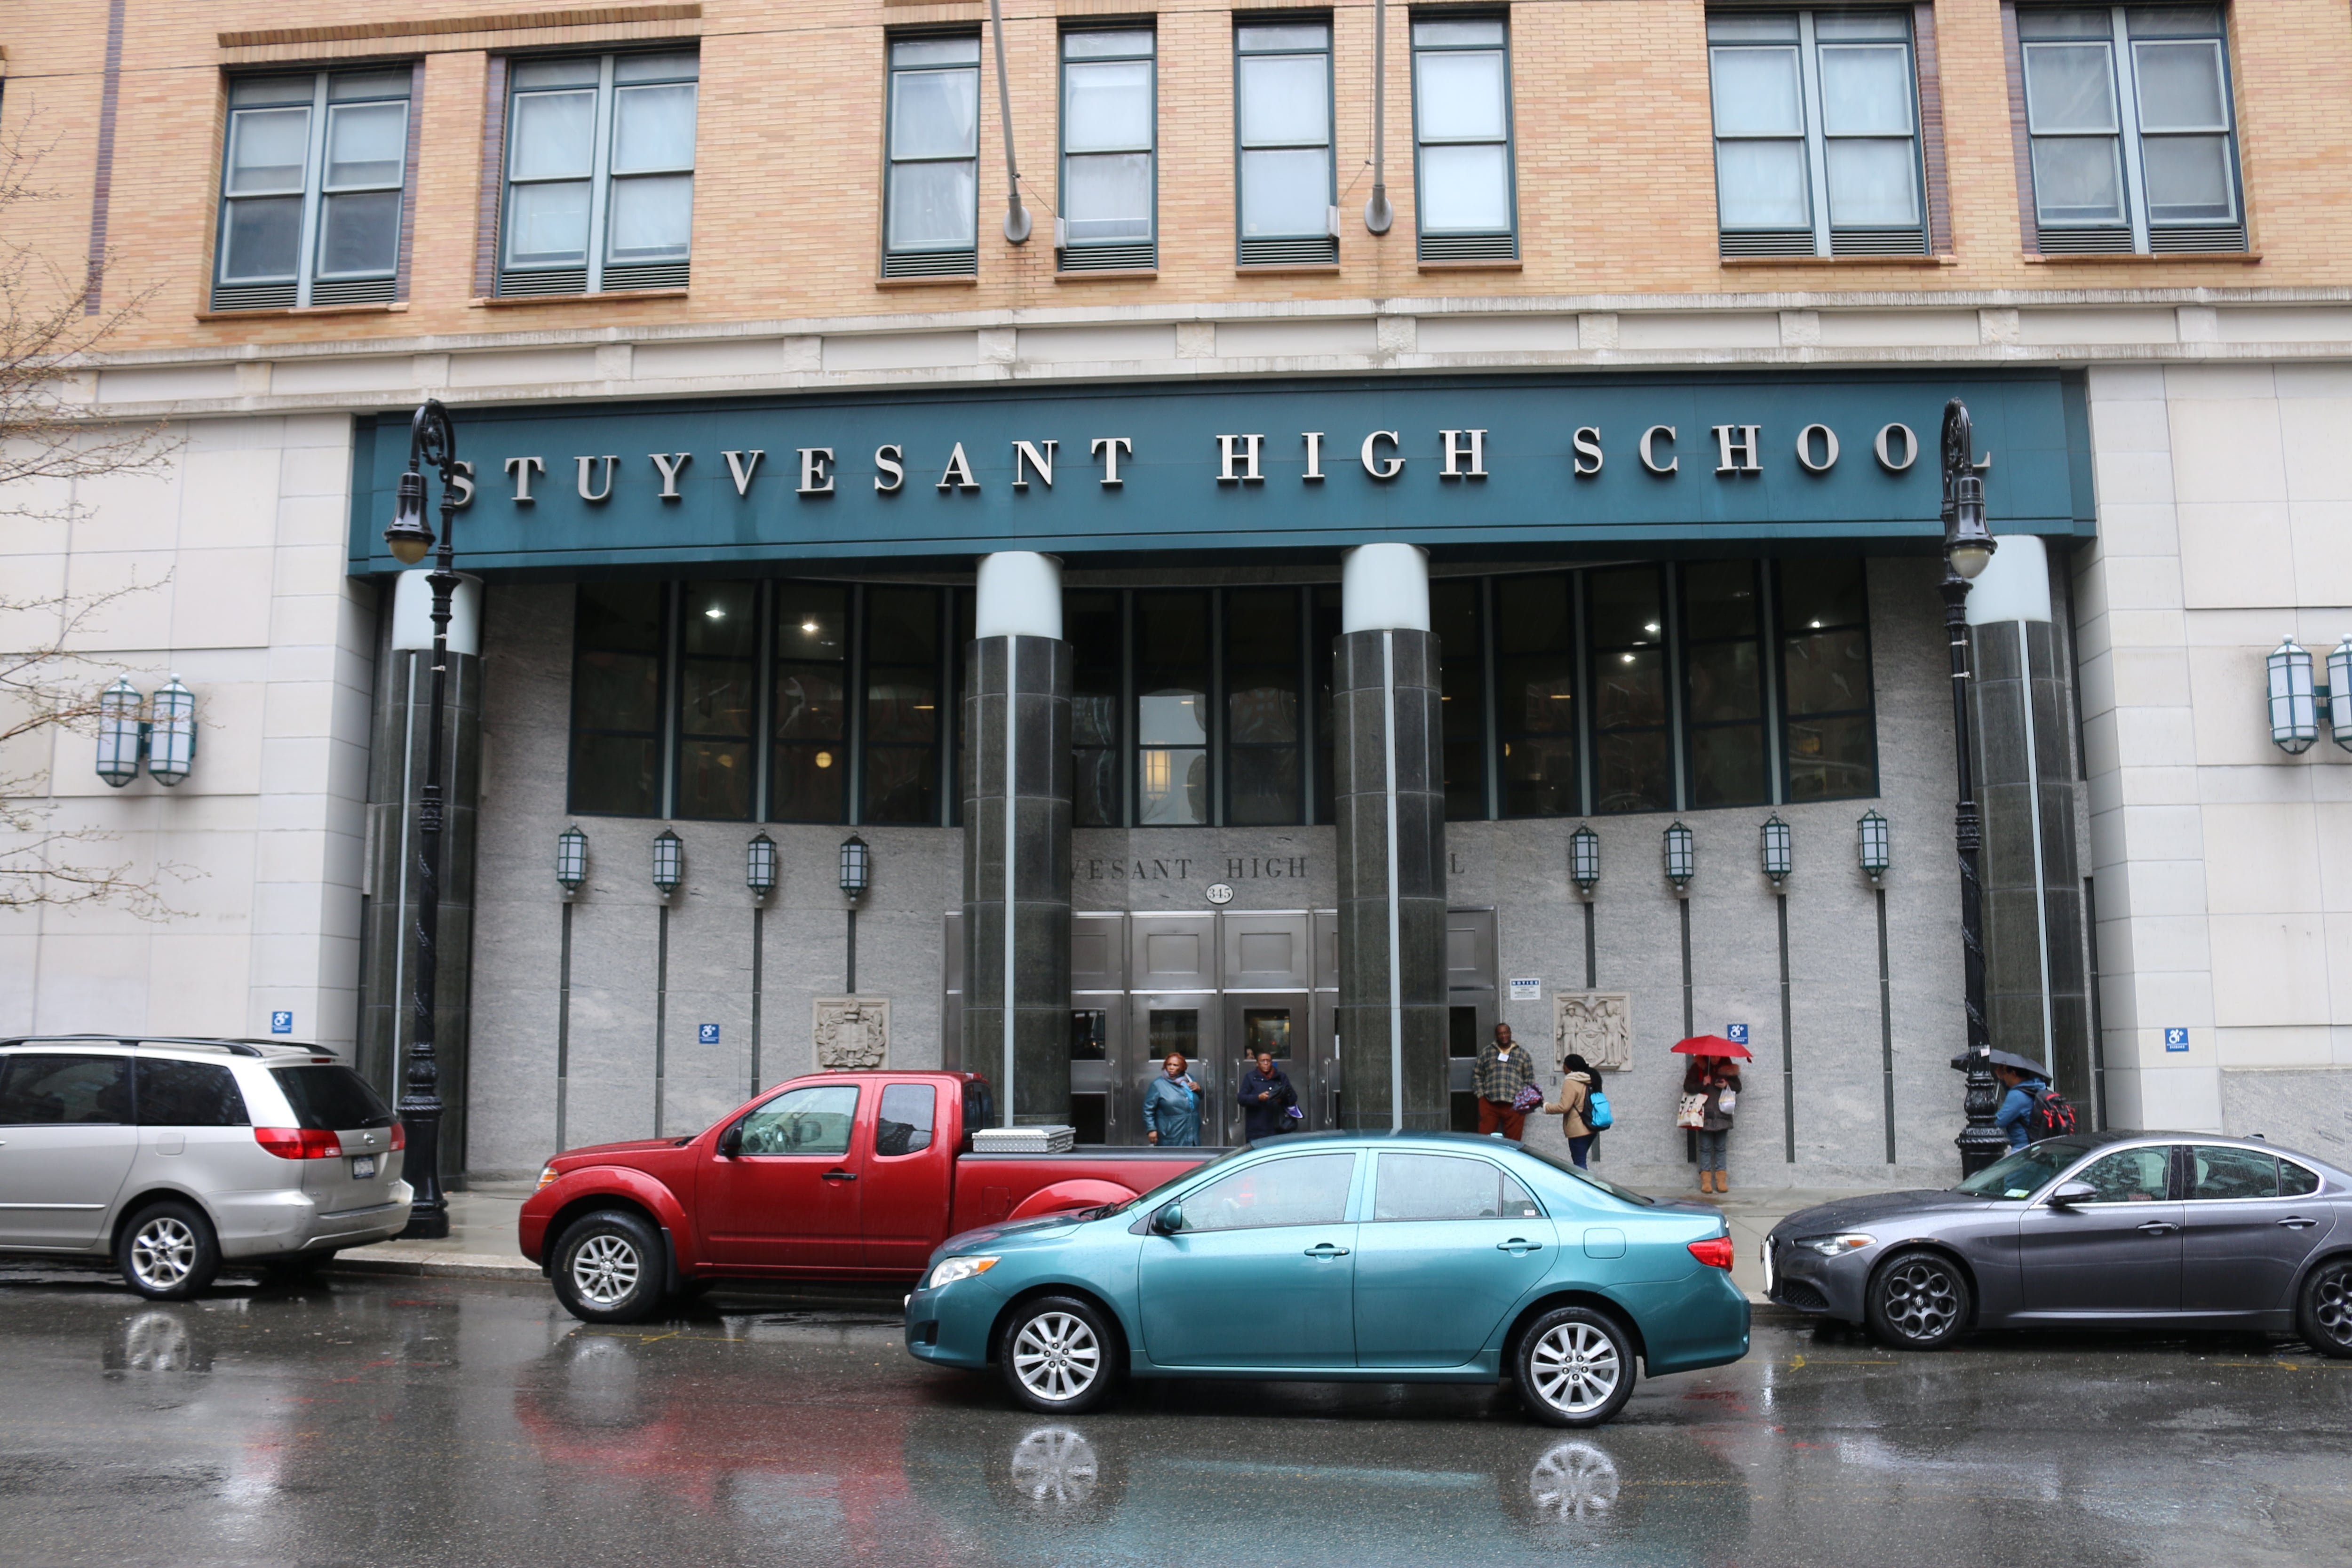 The exterior of a school with several cars out front